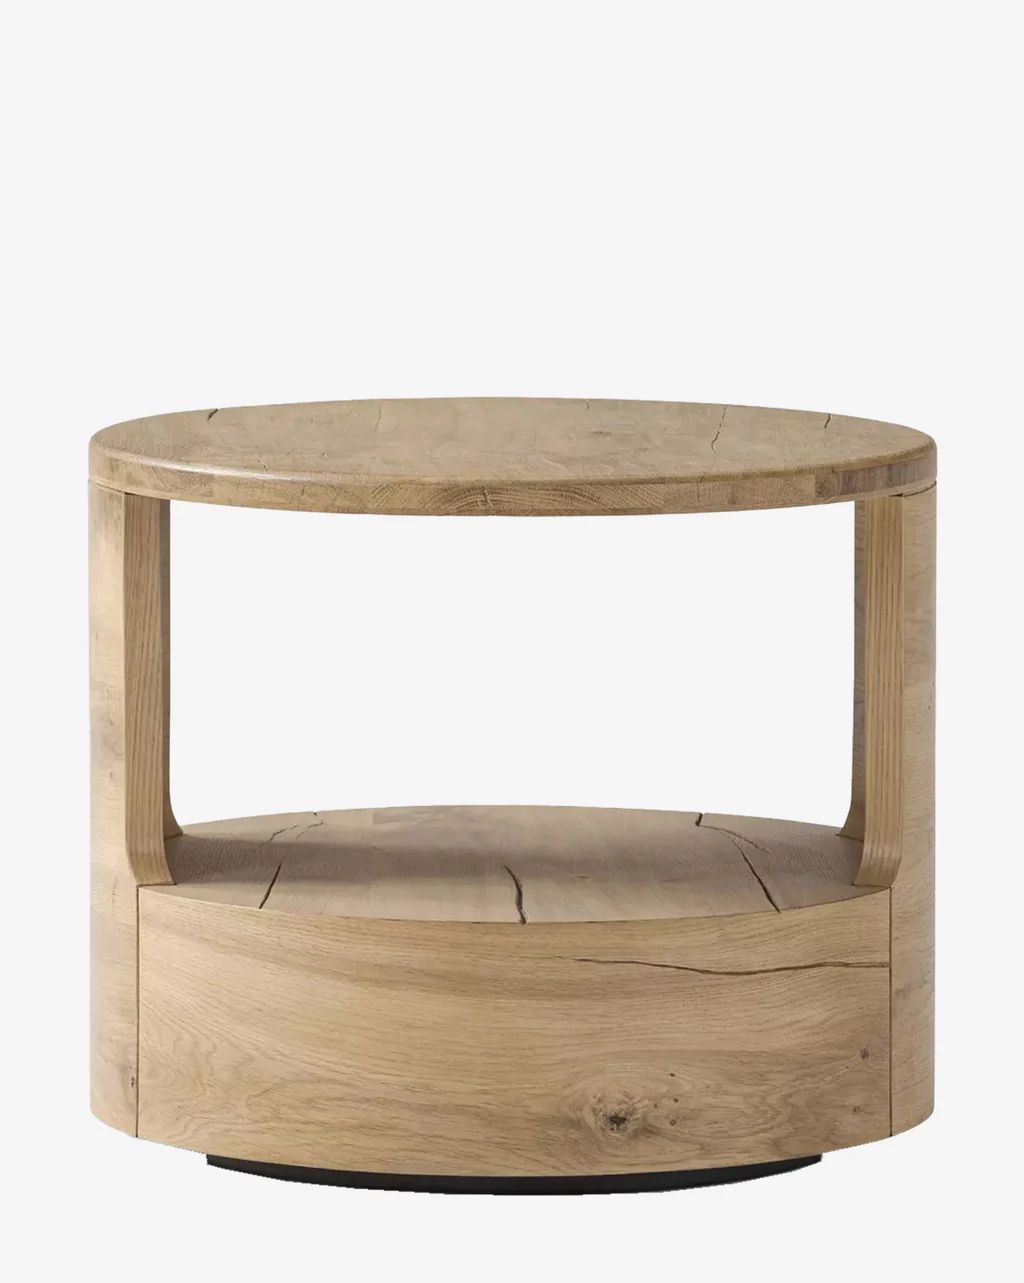 Adams End Table | McGee & Co.